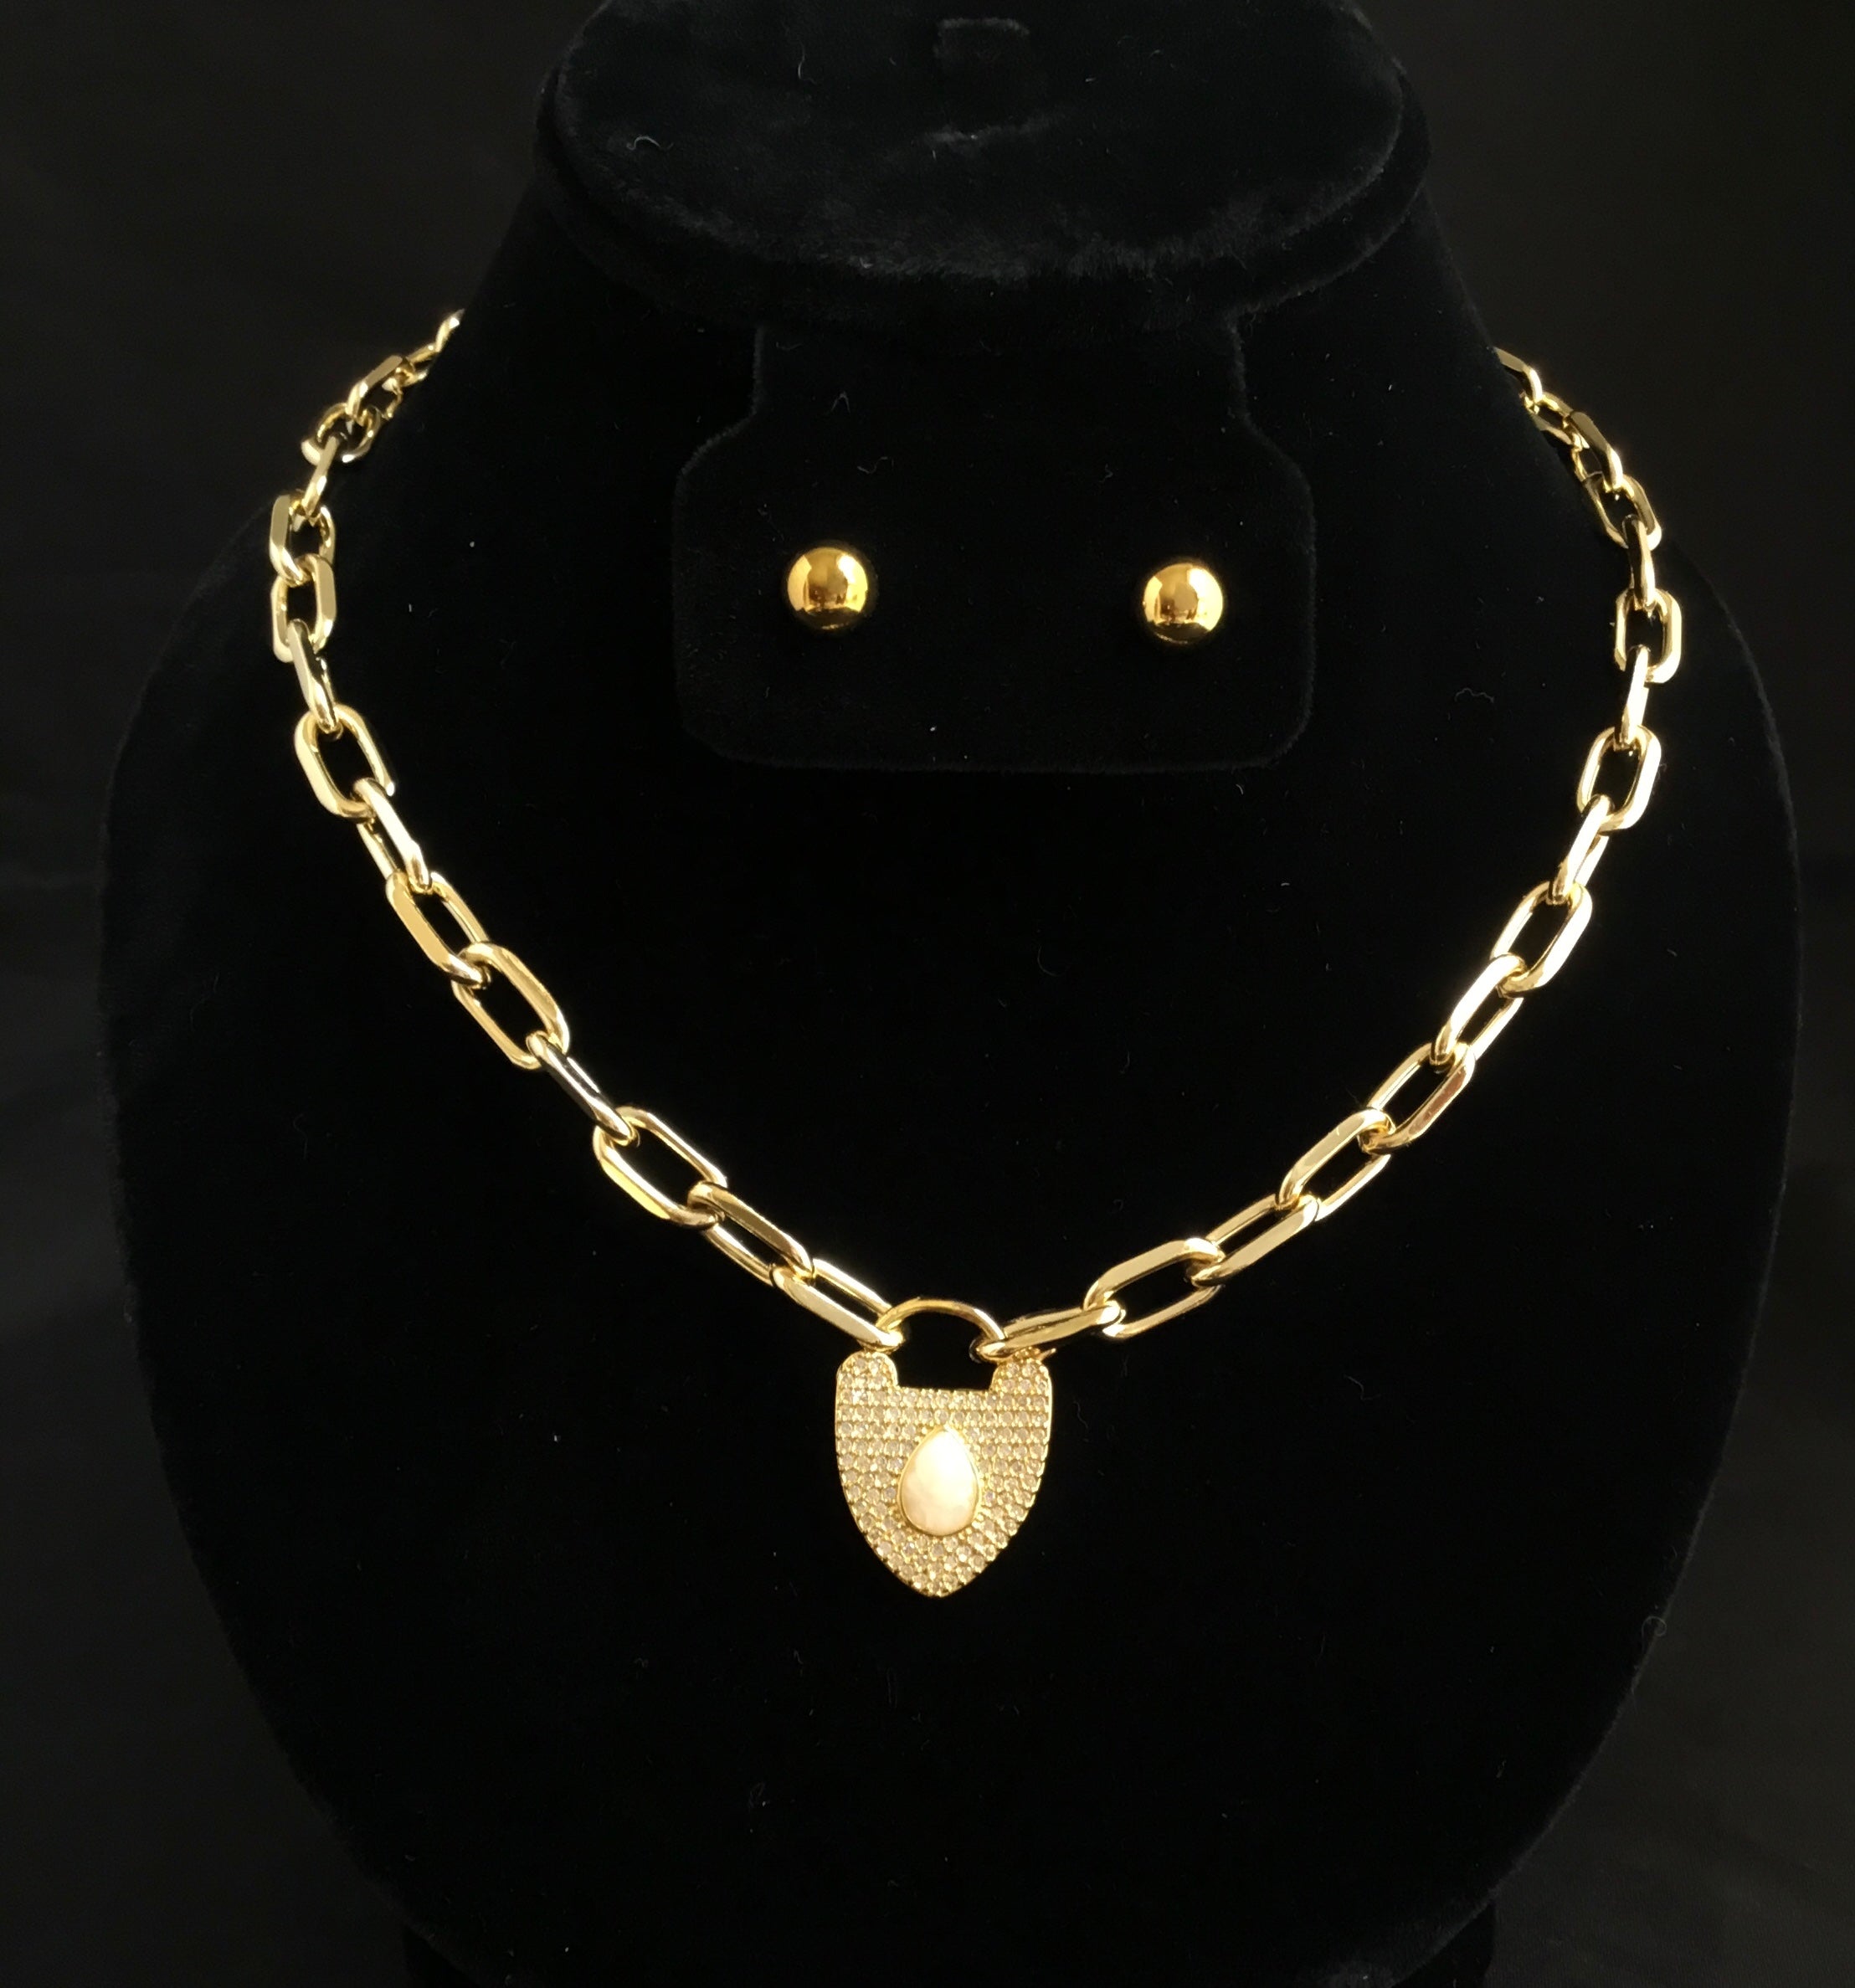 Gold Filled Links Necklace with Padlock Heart and Studs Earrings